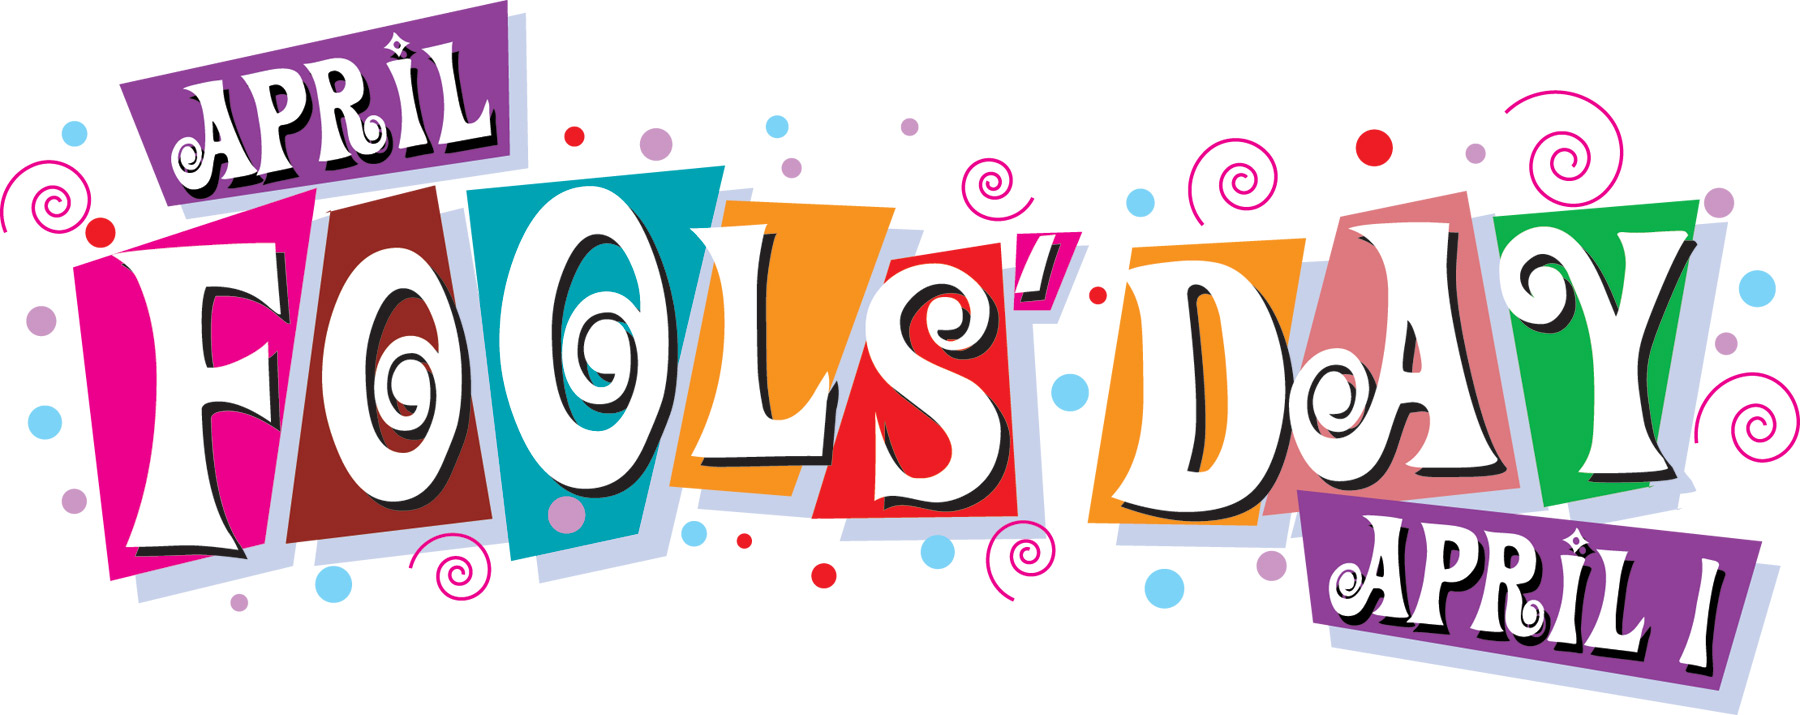 April Fool S Day 2014 Clipart Photos And Images   Happy Holidays    